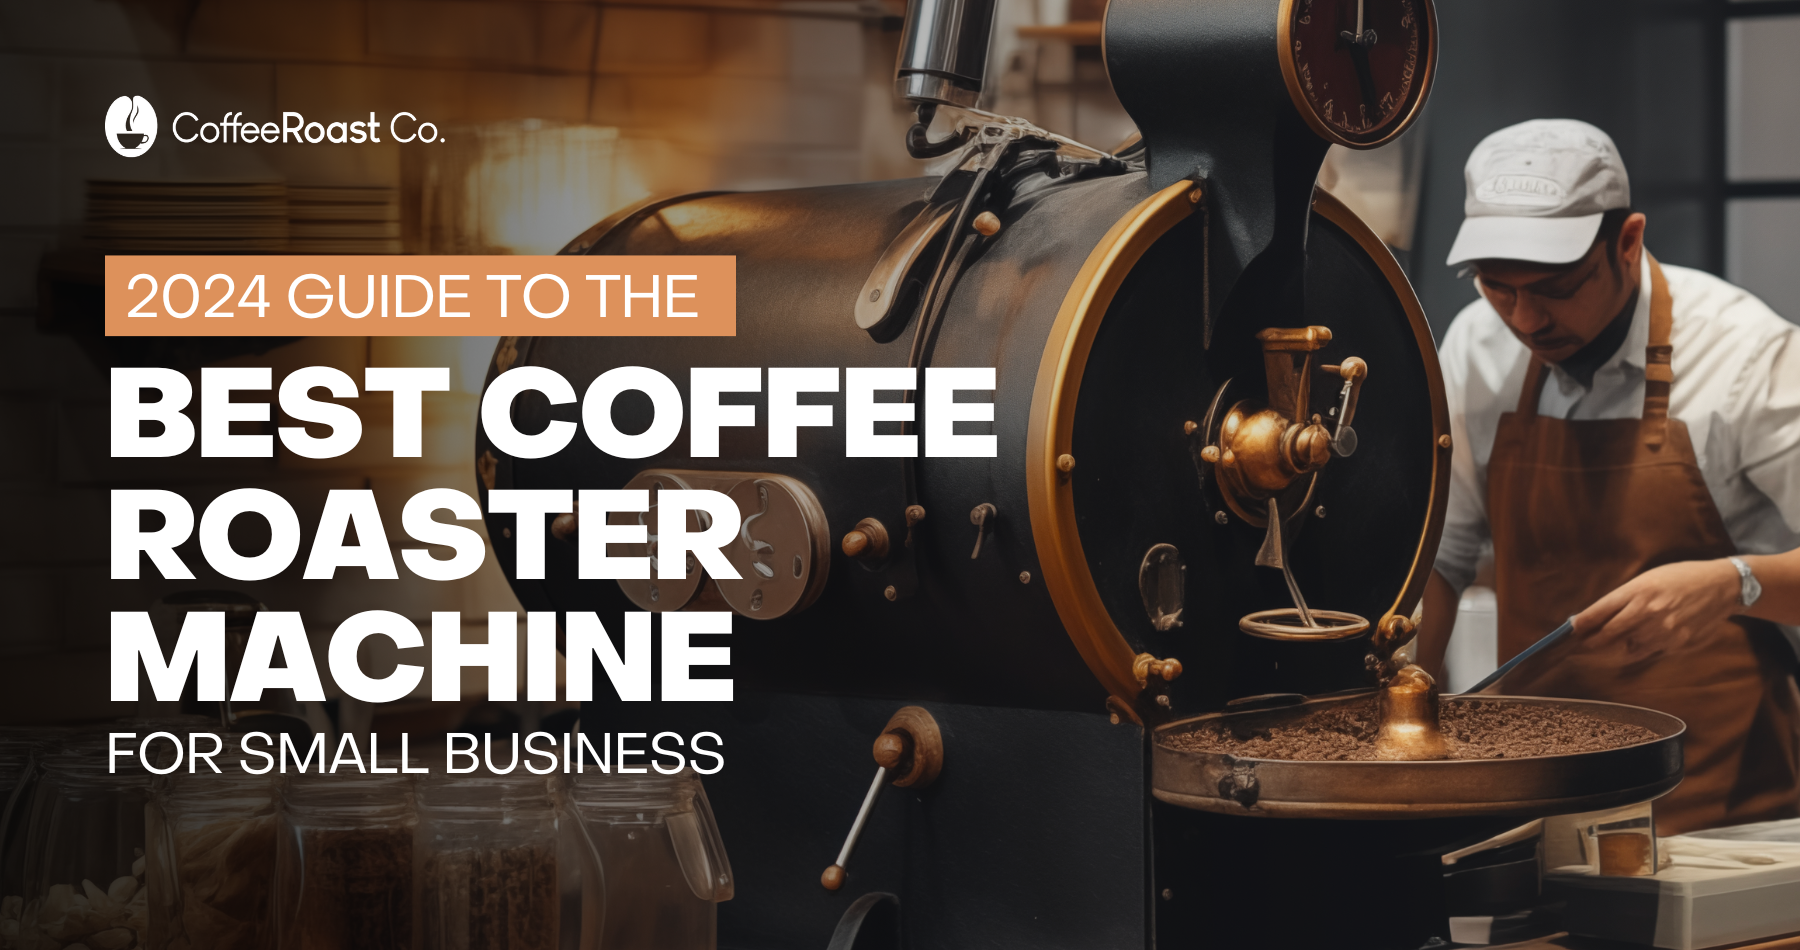 Best Coffee Roaster machine for Small Business